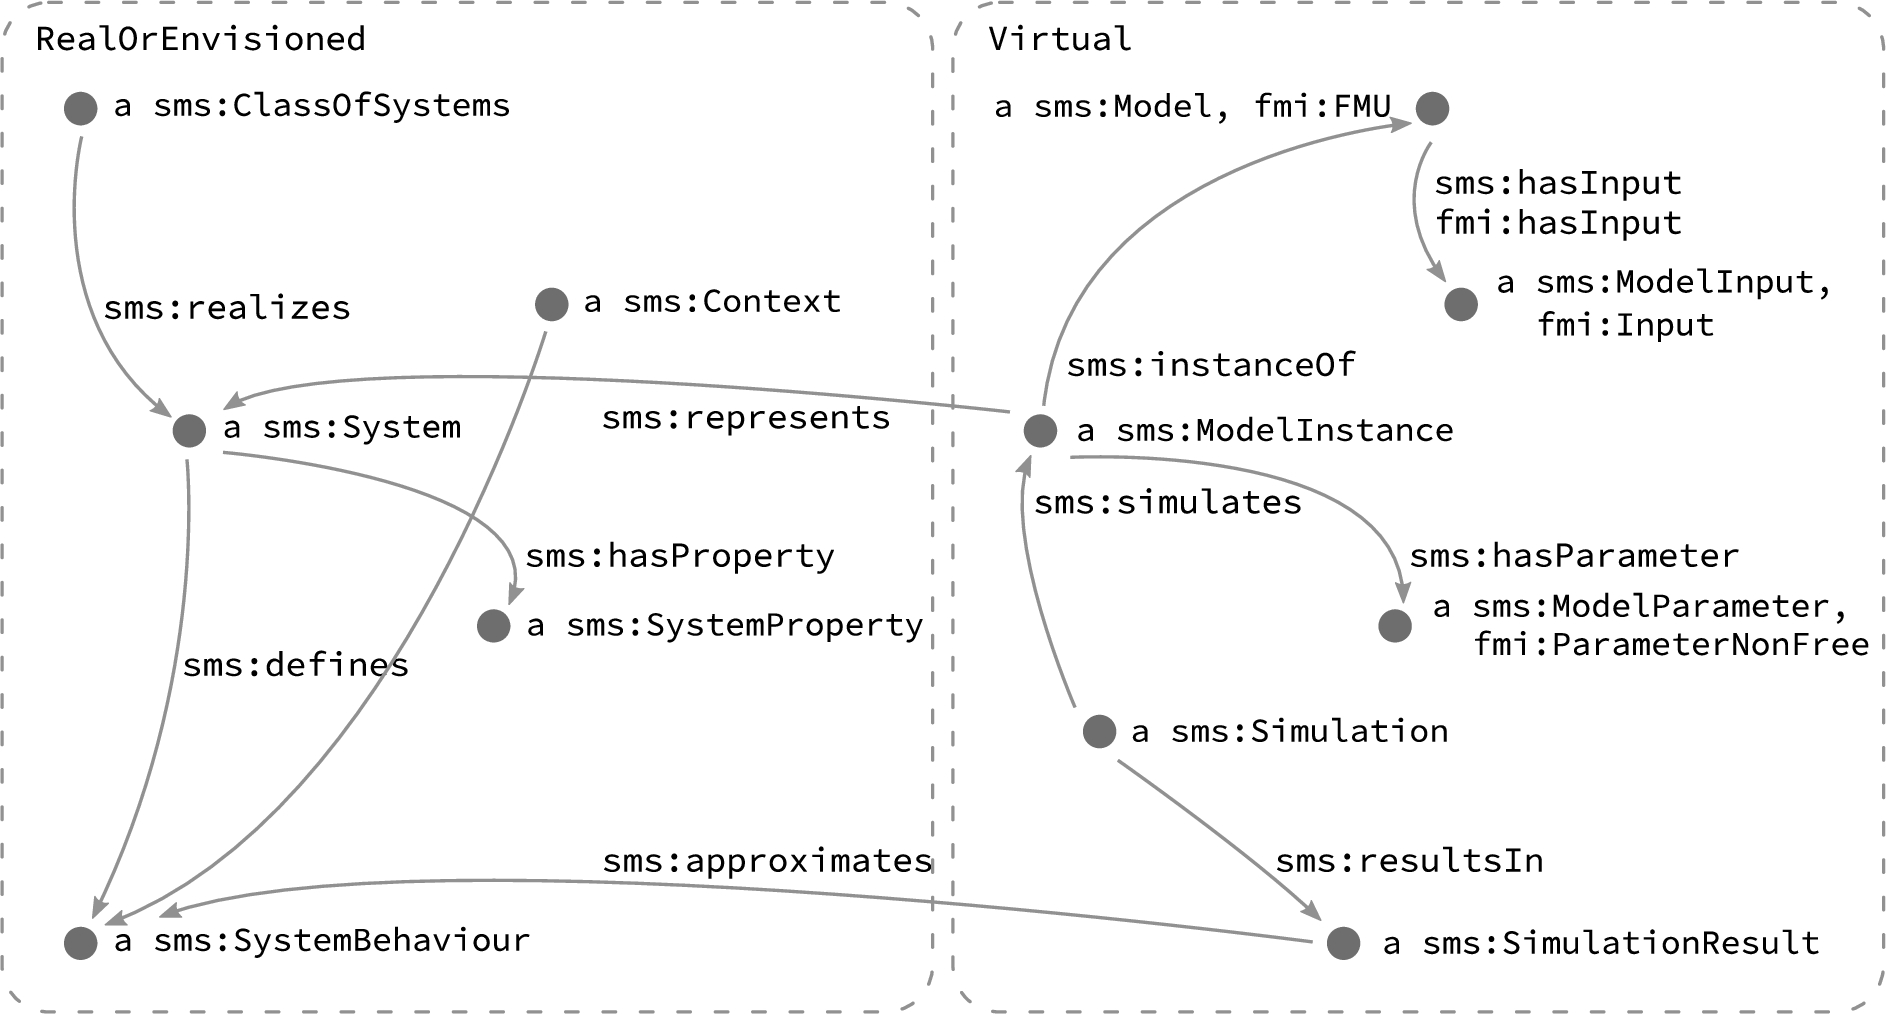 The FMI- and SMS-ontologies allow relating abstract entities of the M&S-domain to their counterparts in the real (or envisioned) world, as shown by this graph visualization.